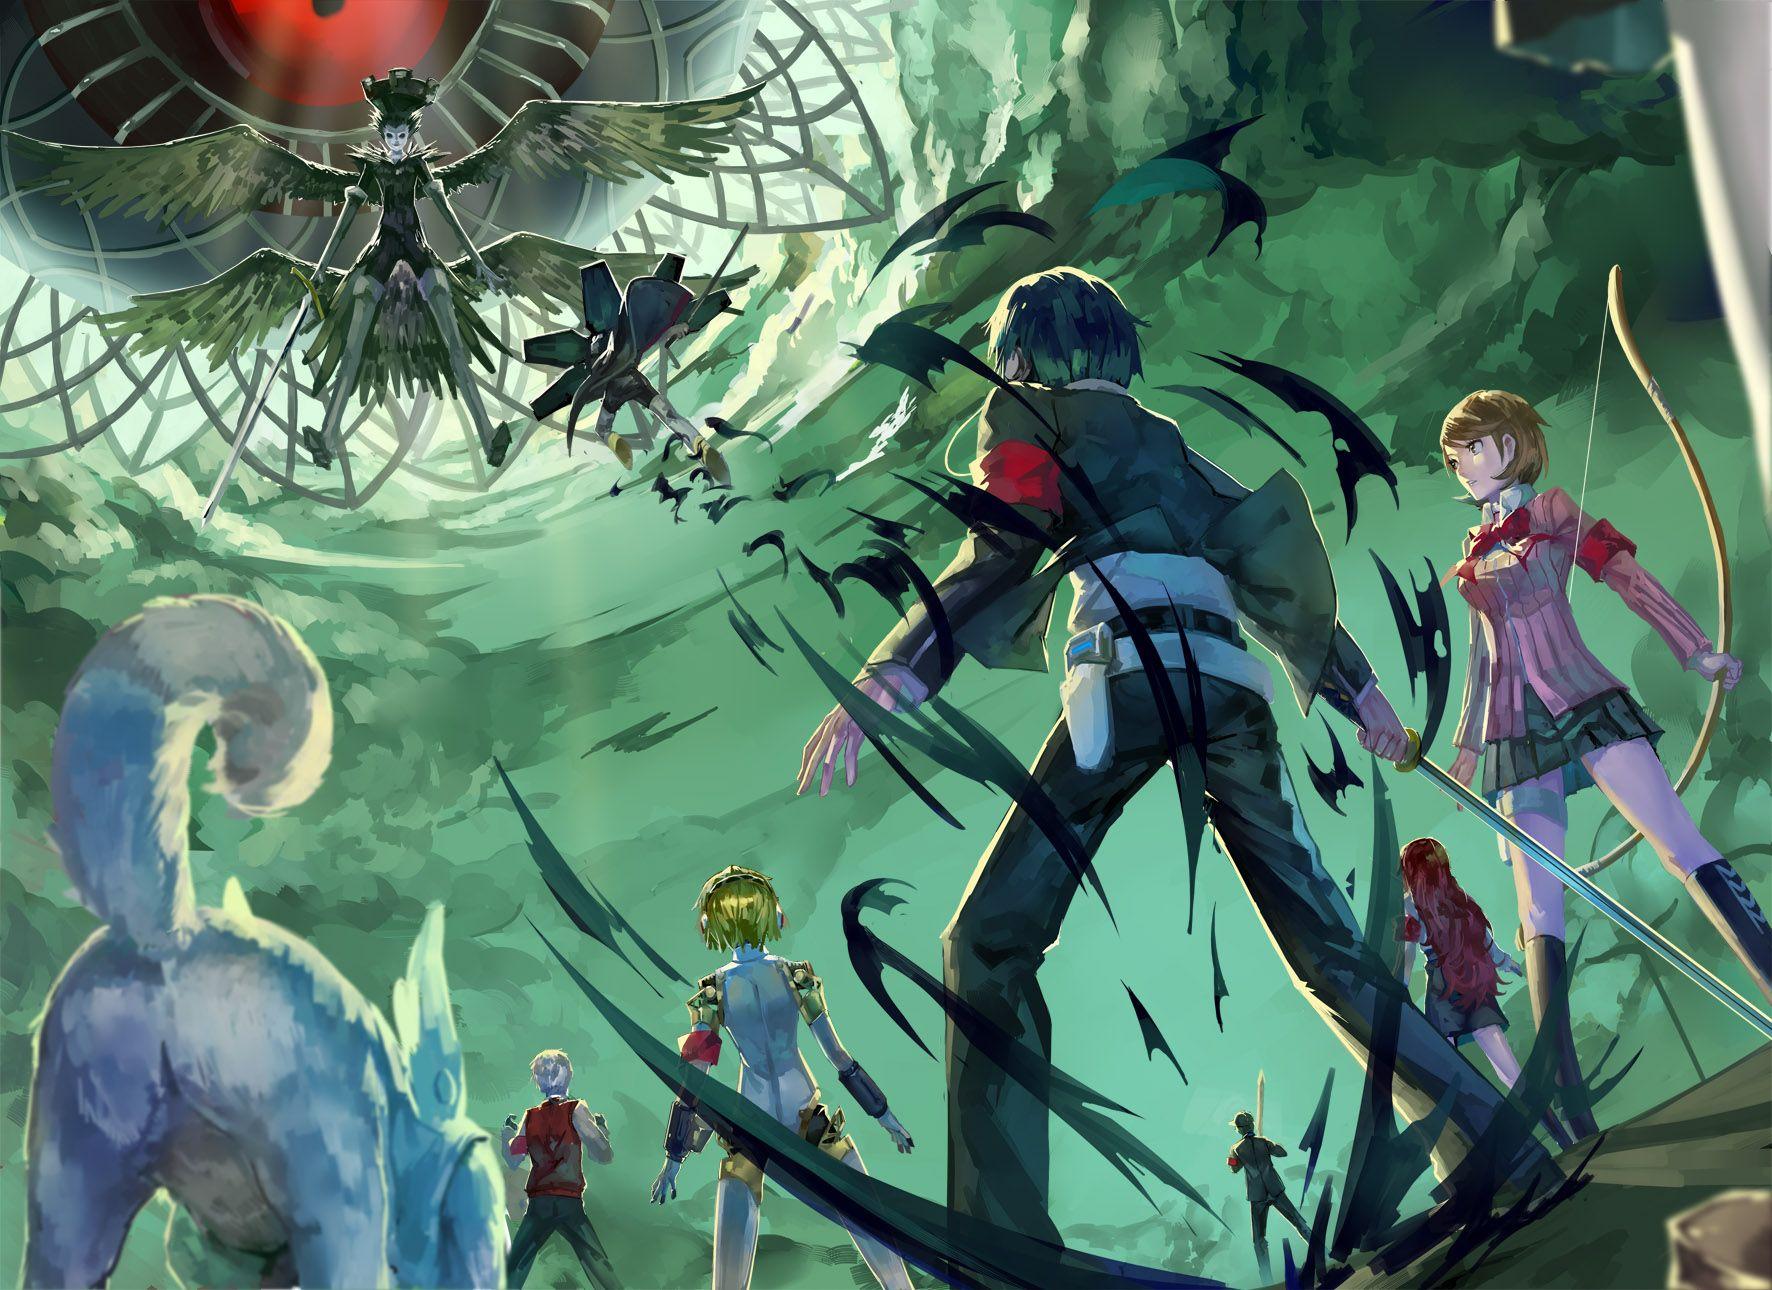 Persona 3 The Movie Wallpapers - Wallpaper Cave